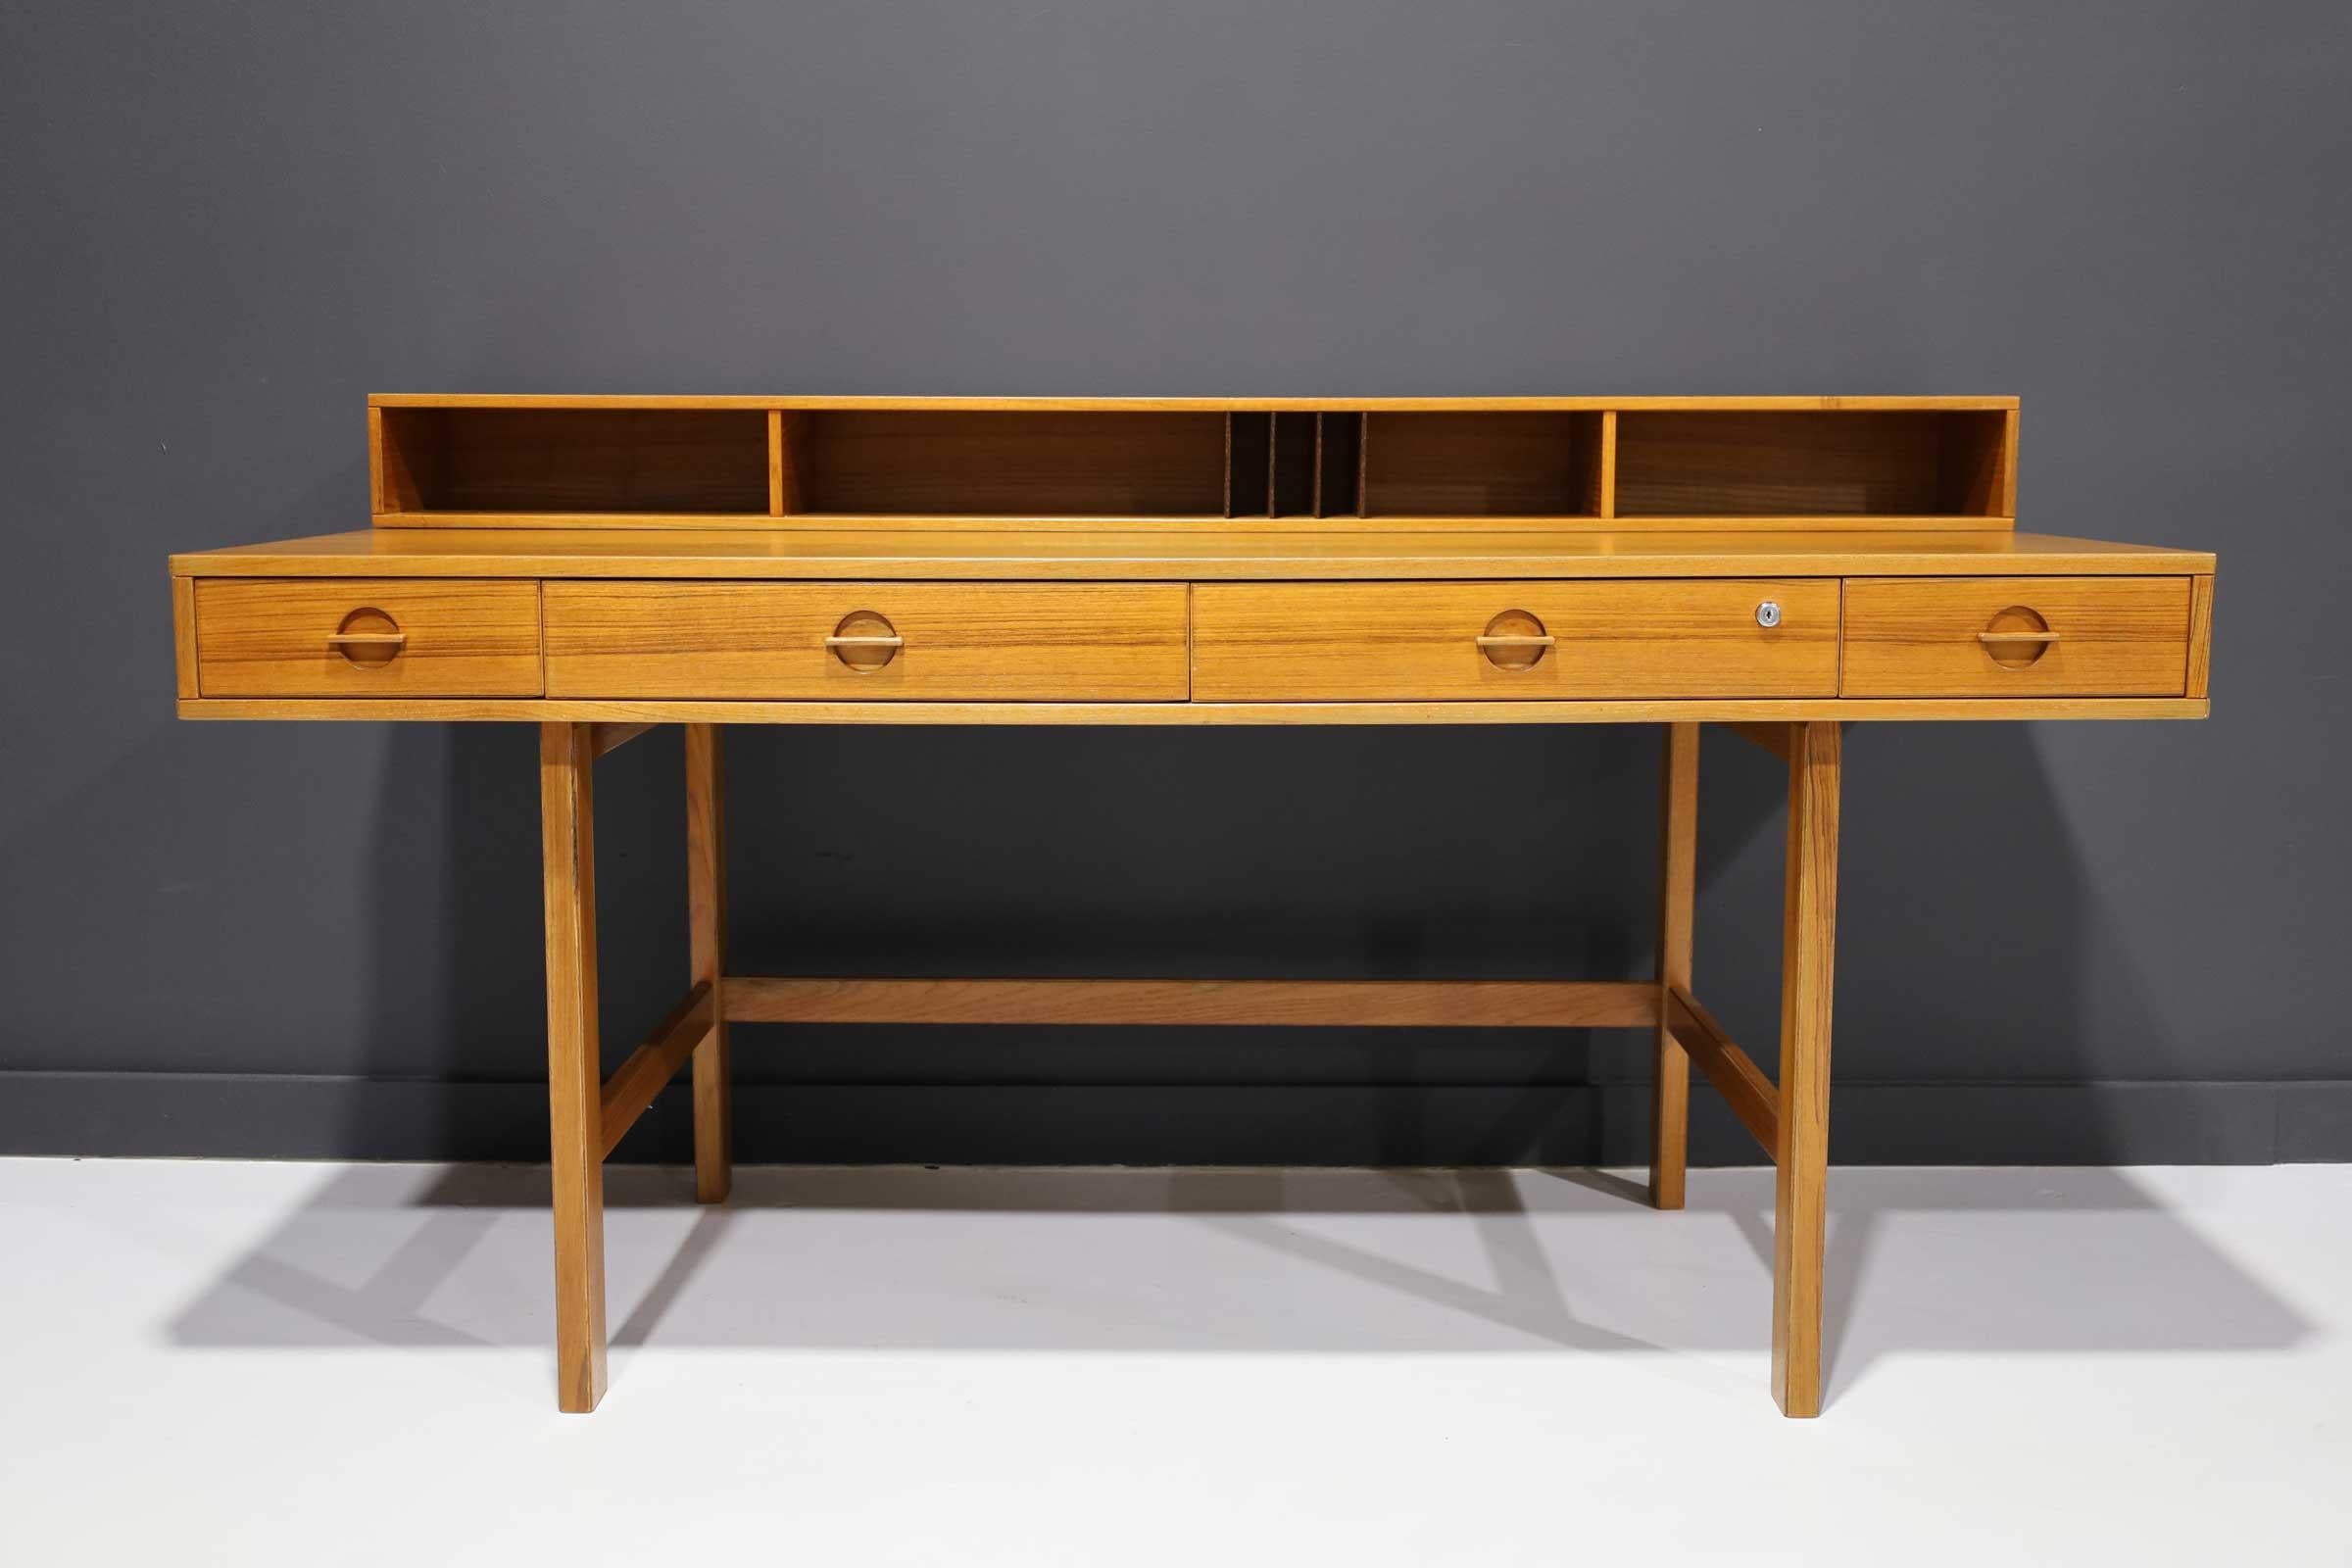 Peter Løvig Nielsen flip-top teak desk for Dansk designs.
circa 1970s

Beautifully grained teak with unique flip top shelf flips down to extend the desk for more working space and can be used as a partner’s desk. Restored.

Down:
64